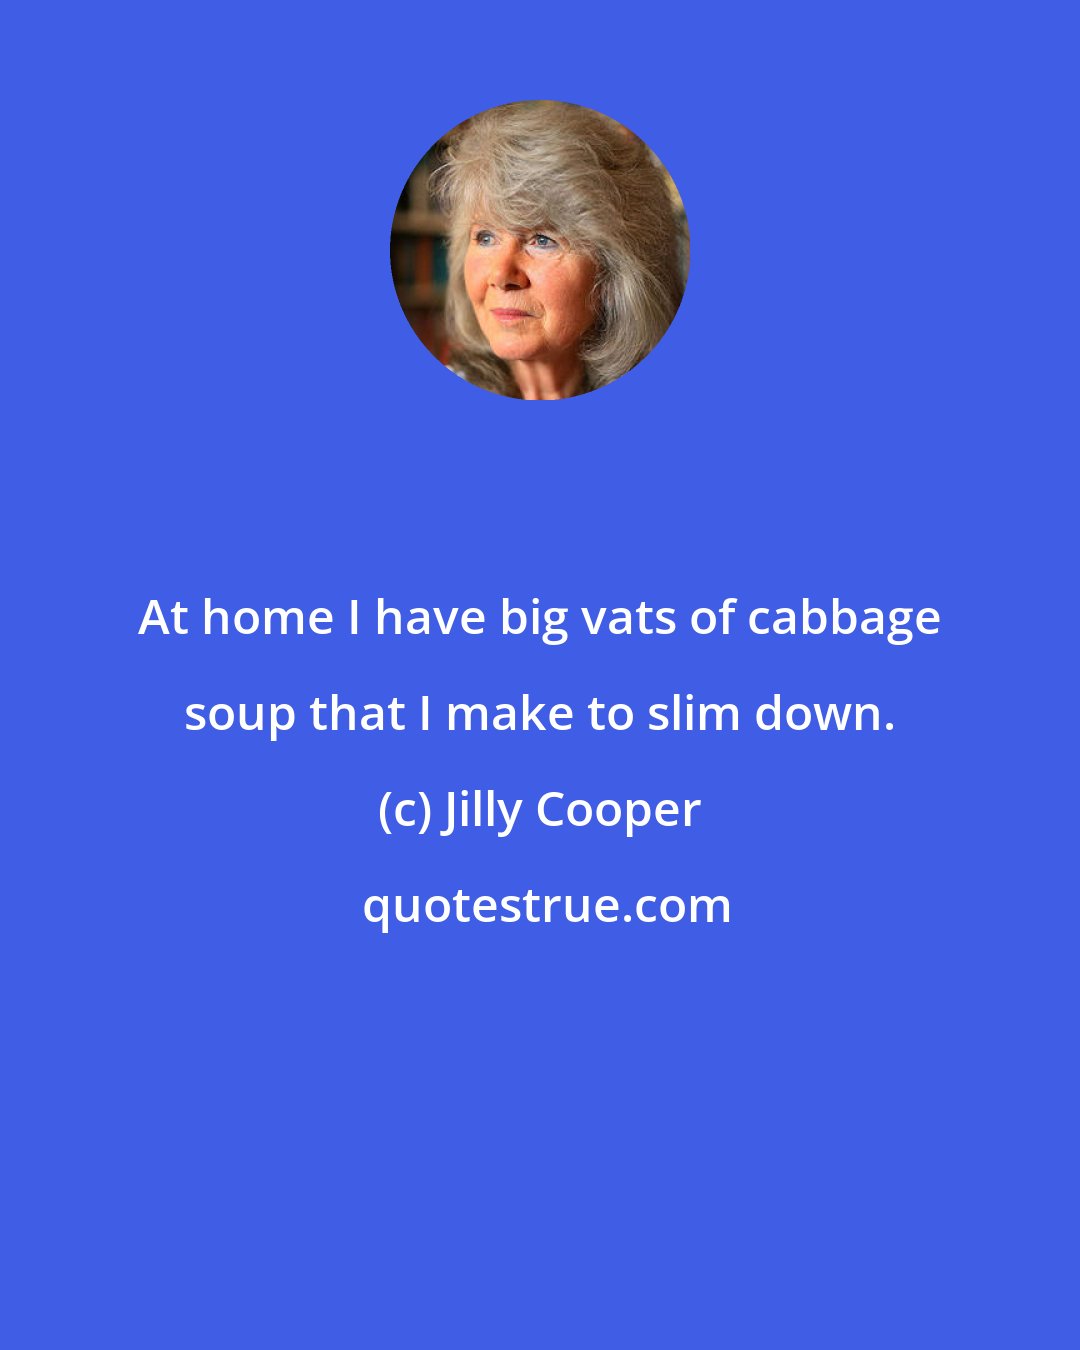 Jilly Cooper: At home I have big vats of cabbage soup that I make to slim down.